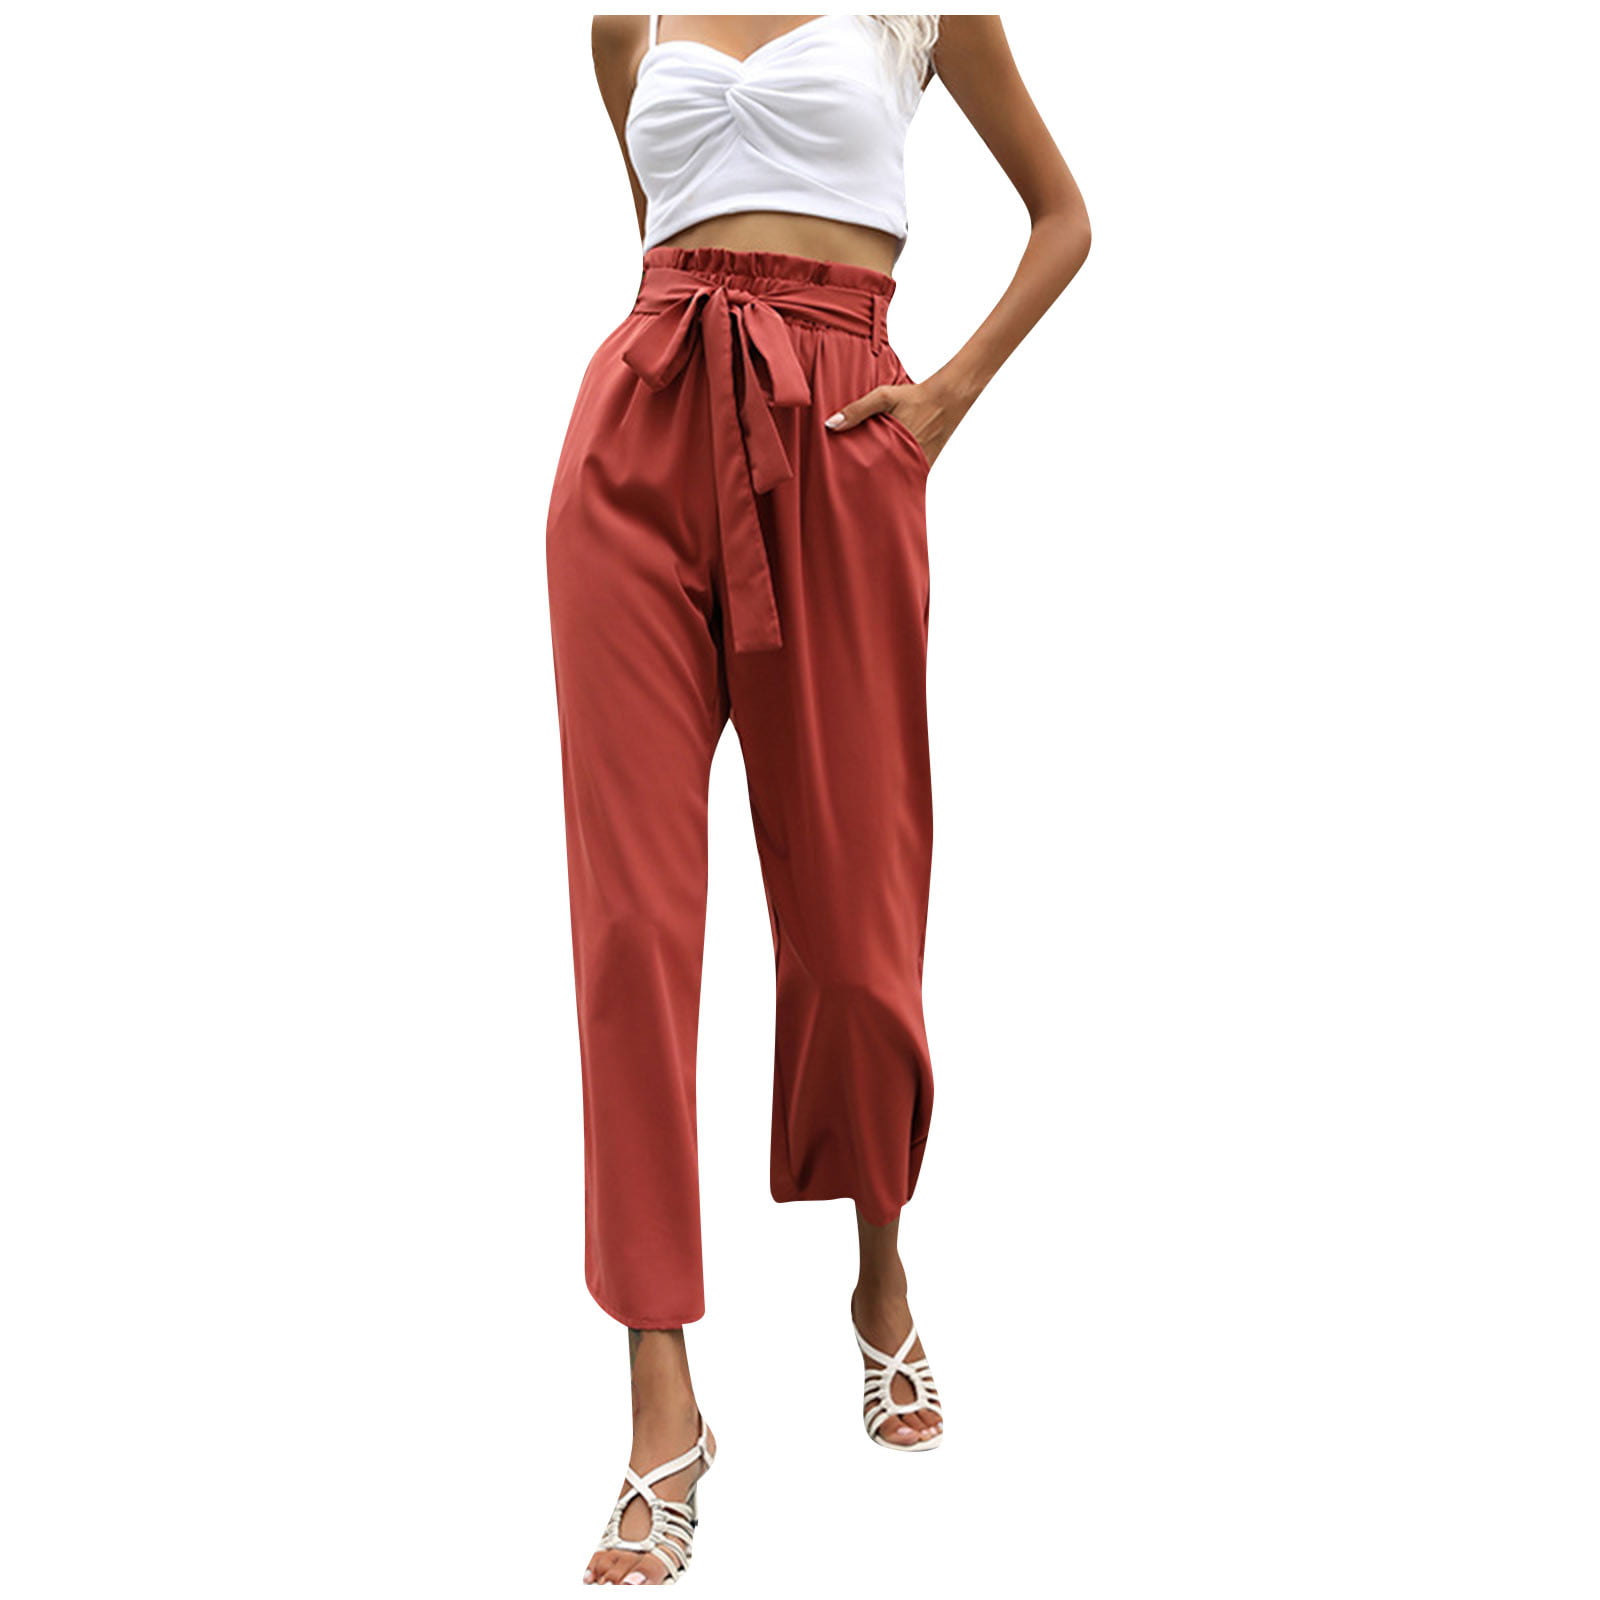 ZXHACSJ Women Relaxed Leisure Pants Solid Color Flip Pocket Straight Leg  Pants Red M